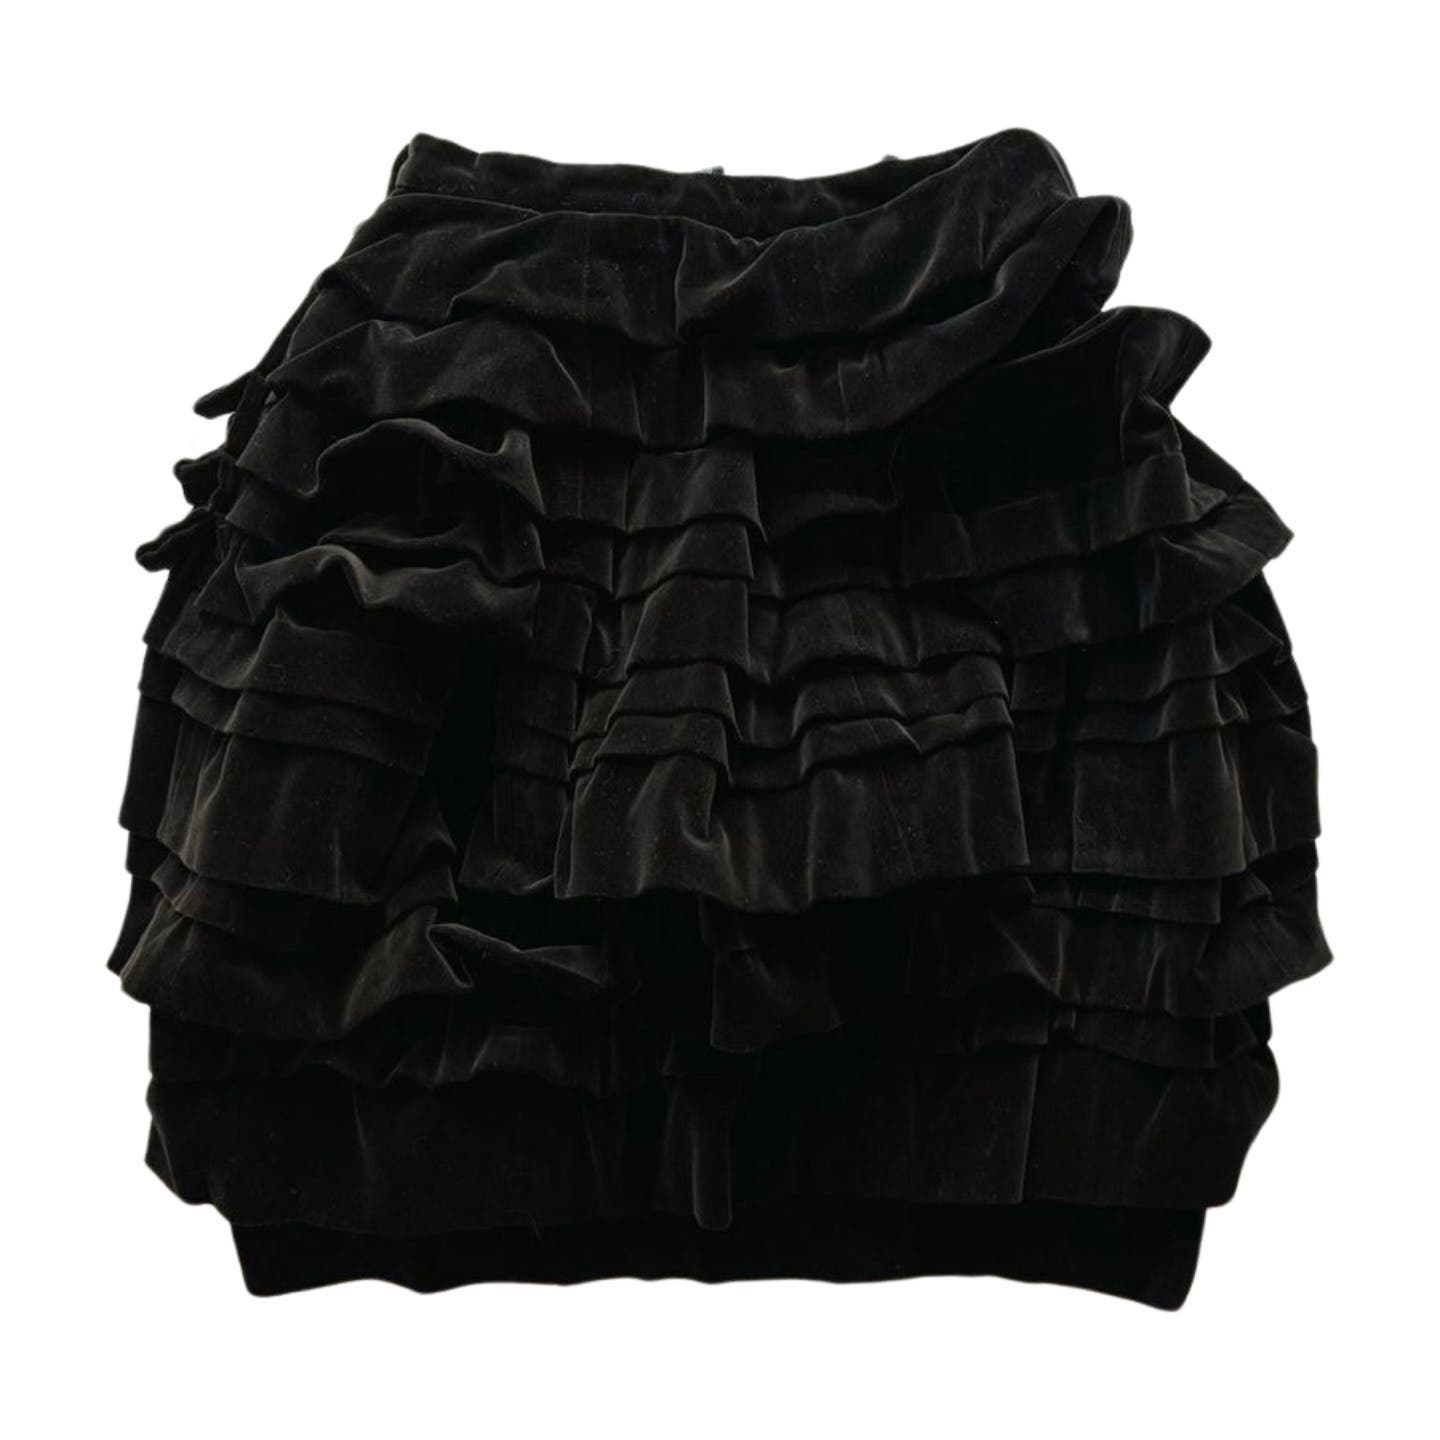 A black velvet mini skirt with multiple layers of ruffled fabric creating a voluminous effect. Reminiscent of 90s Comme des Garçons, the Vintage 1990 Comme des Garcons Skirt features horizontal pleats and a slightly flared silhouette. The waistband appears fitted without any visible closures, giving it a vintage condition vibe.